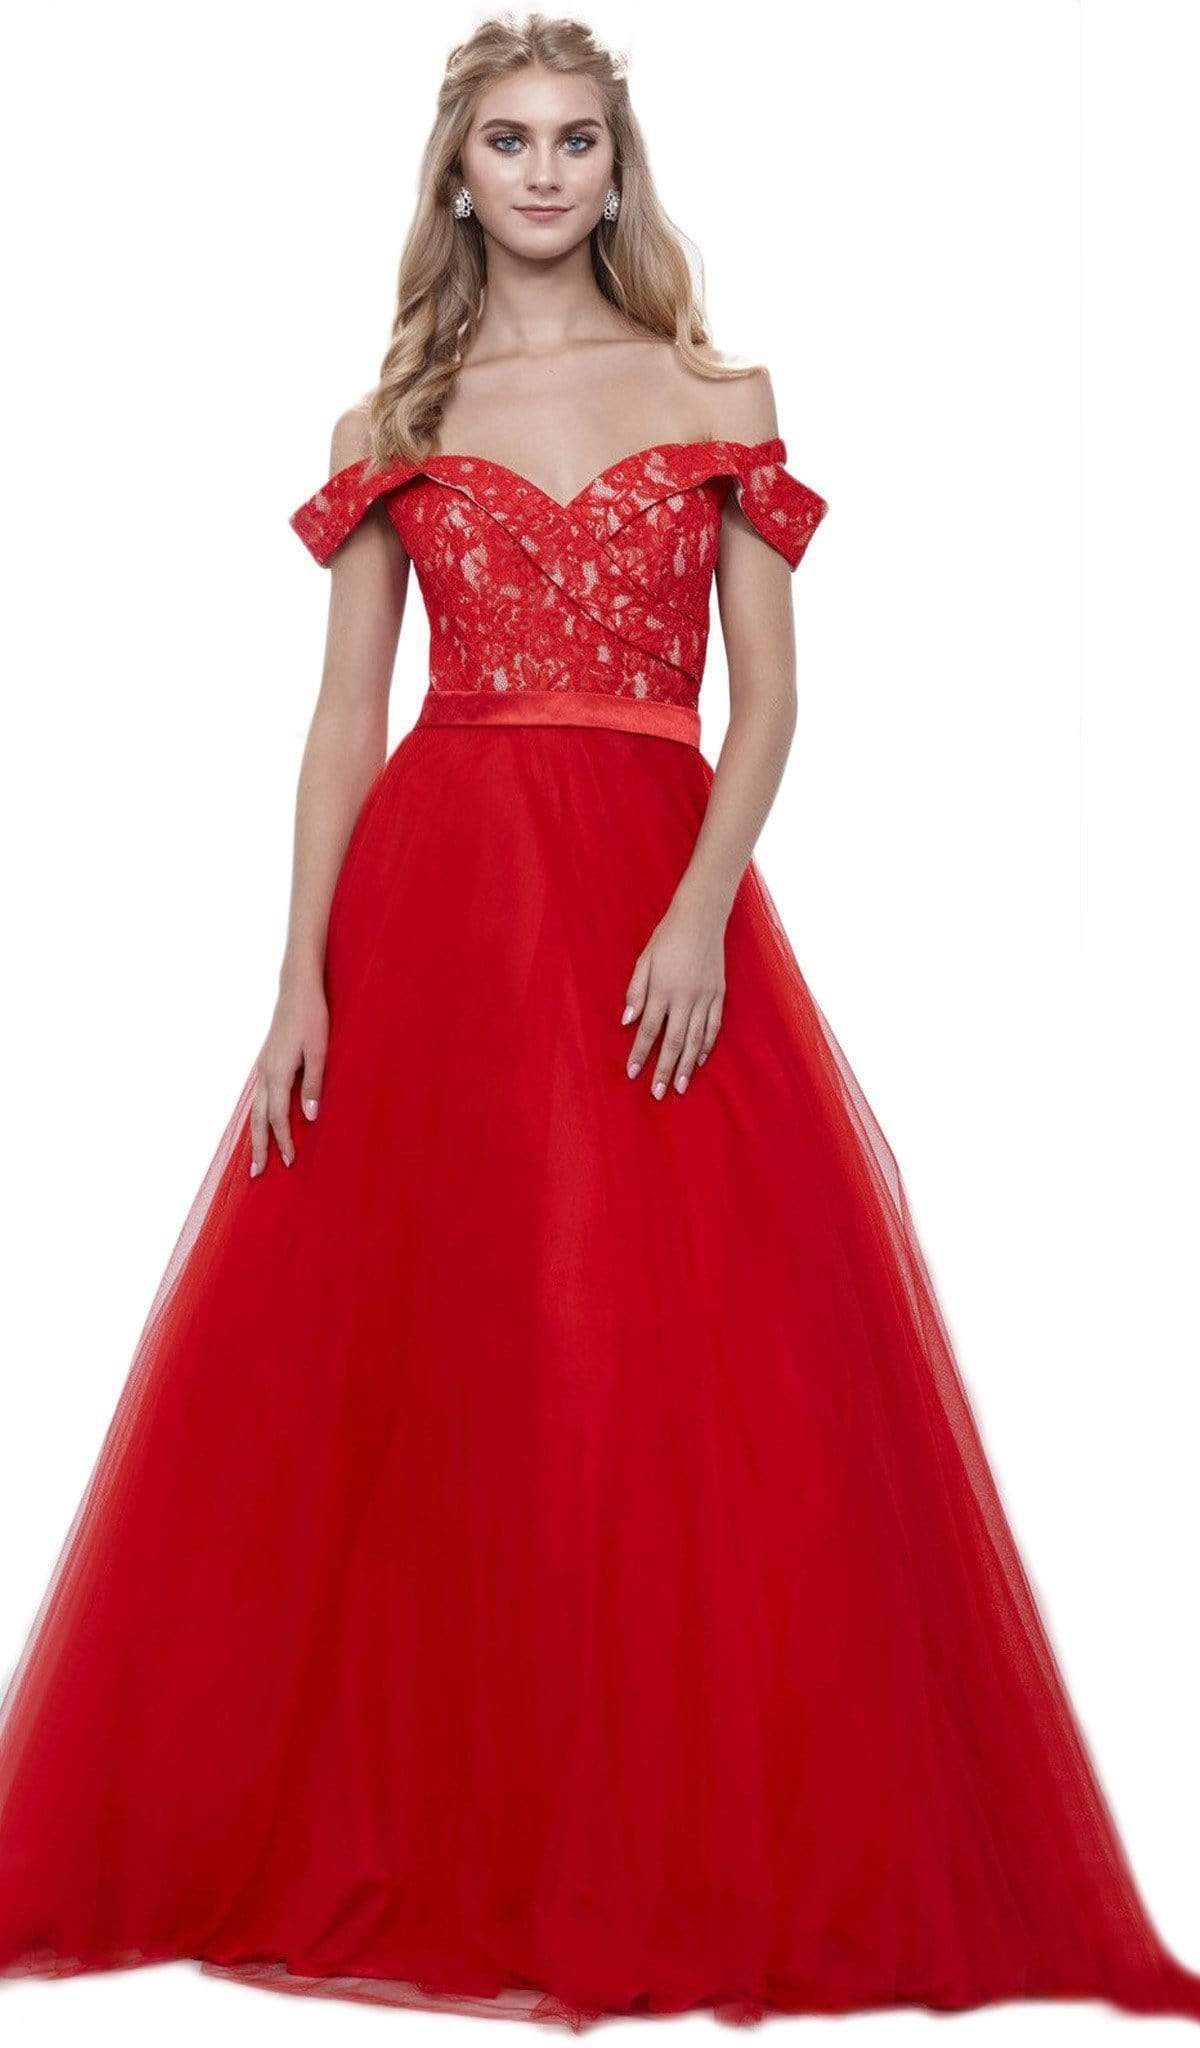 Nox Anabel - 8372 Lace Off-Shoulder Ballgown Special Occasion Dress XS / Red